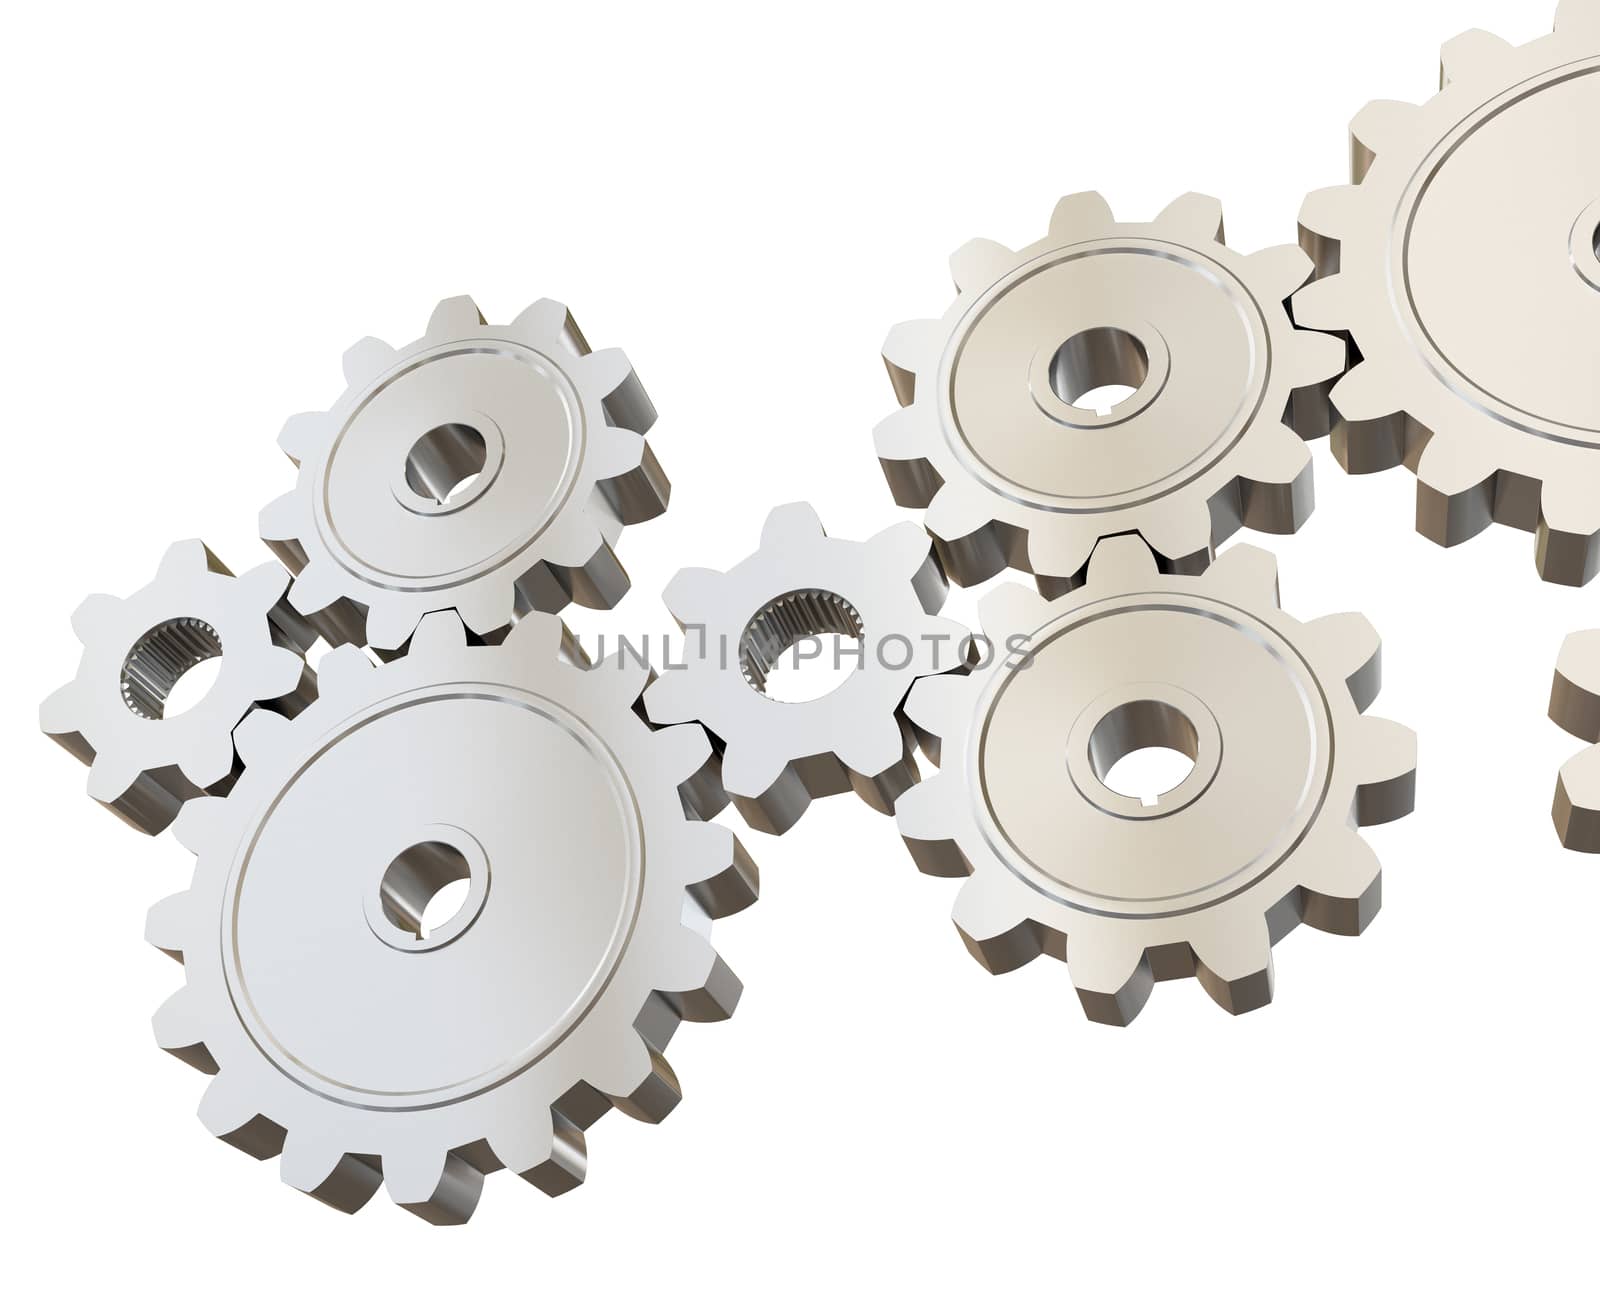 Set of mechanical gears isolated on white background, close up view